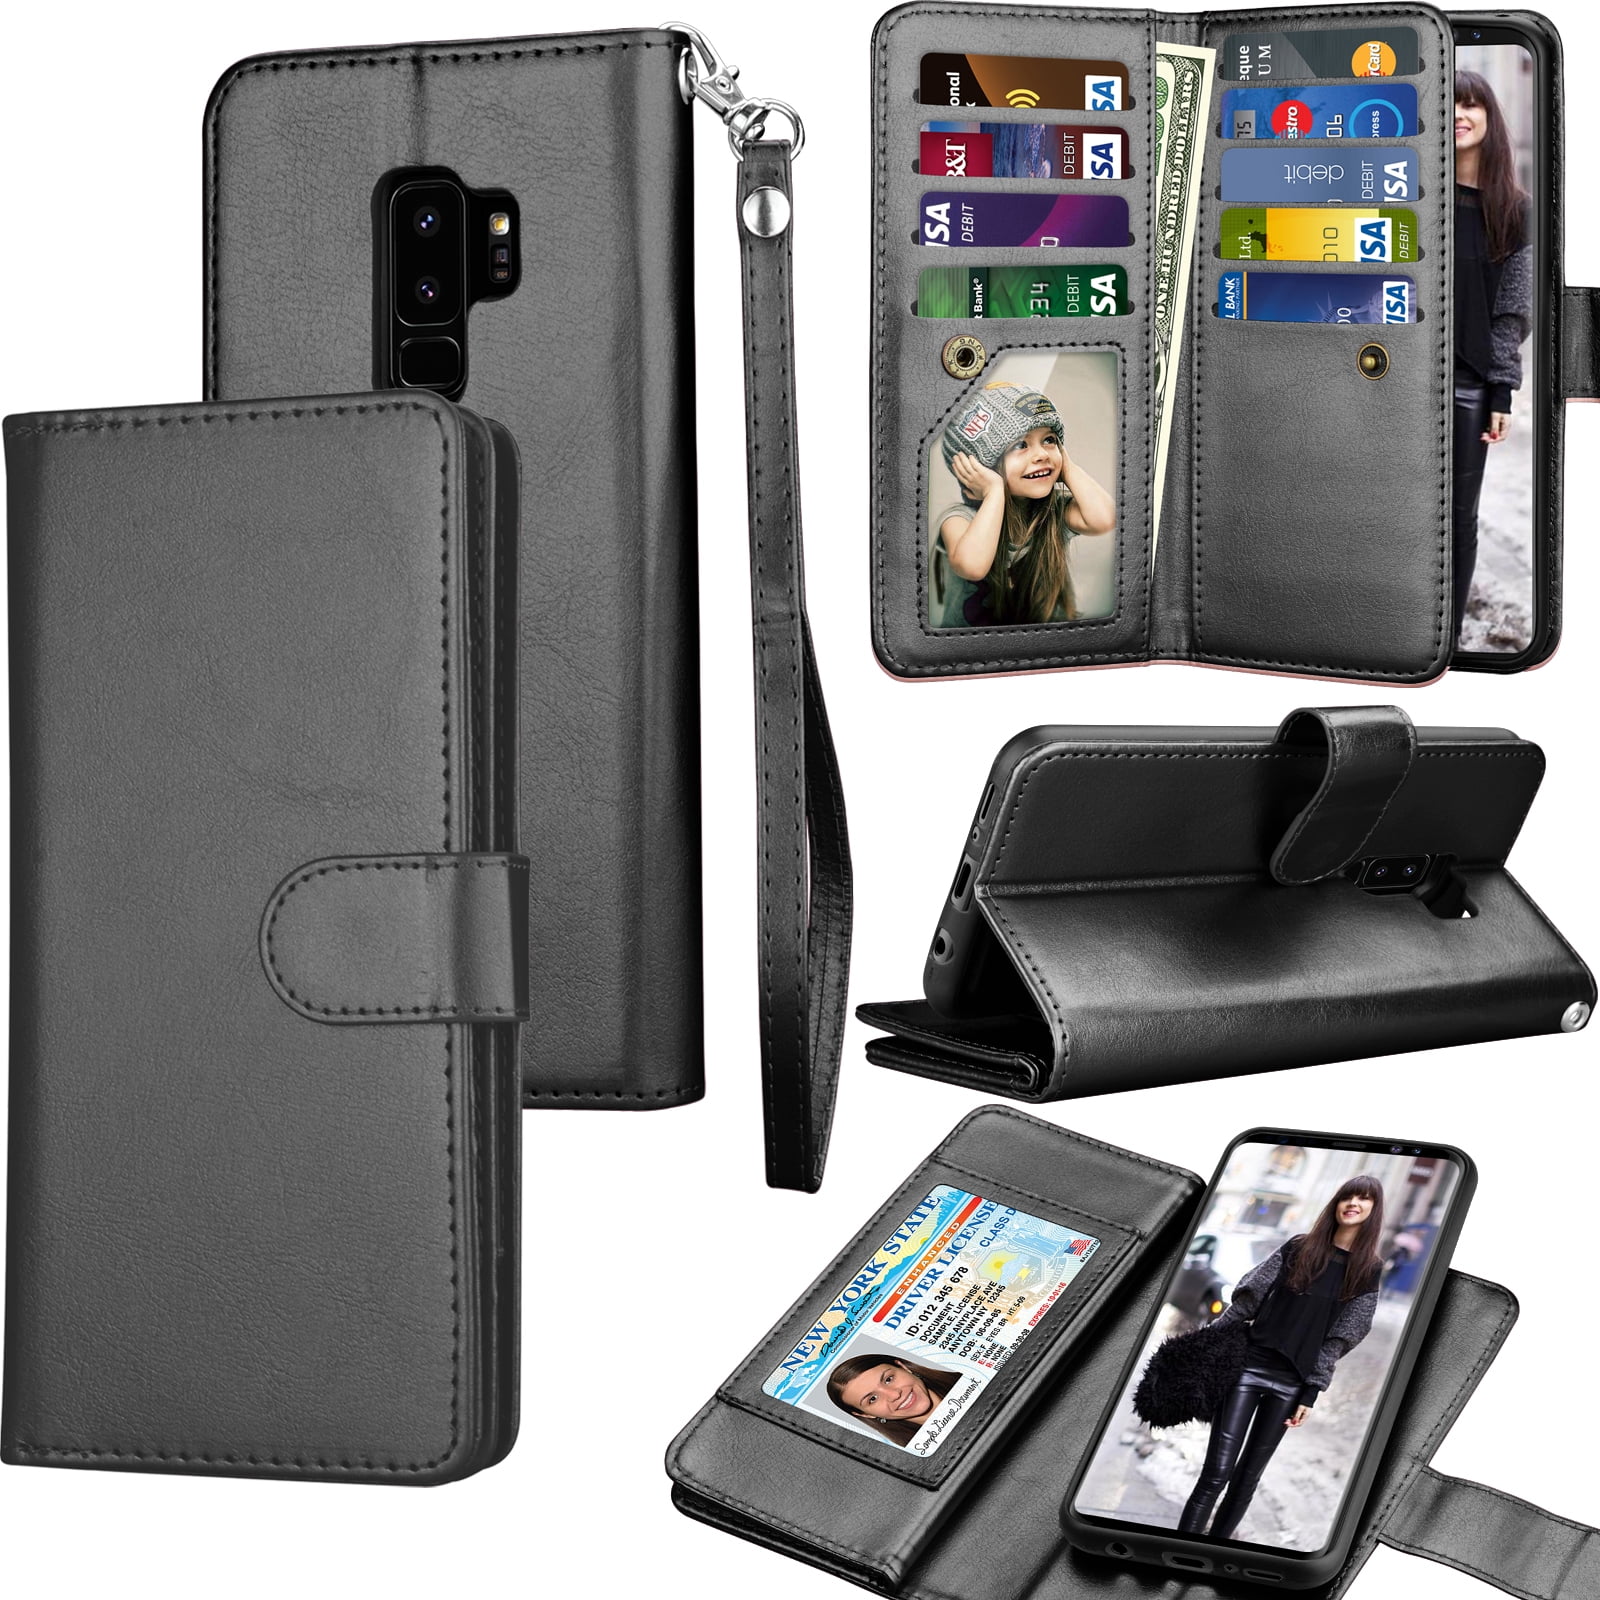 Samsung Galaxy S9 Plus Flip Case Cover for Samsung Galaxy S9 Plus Leather Cell Phone case Kickstand Extra-Durable Business Card Holders with Free Waterproof-Bag Black3 